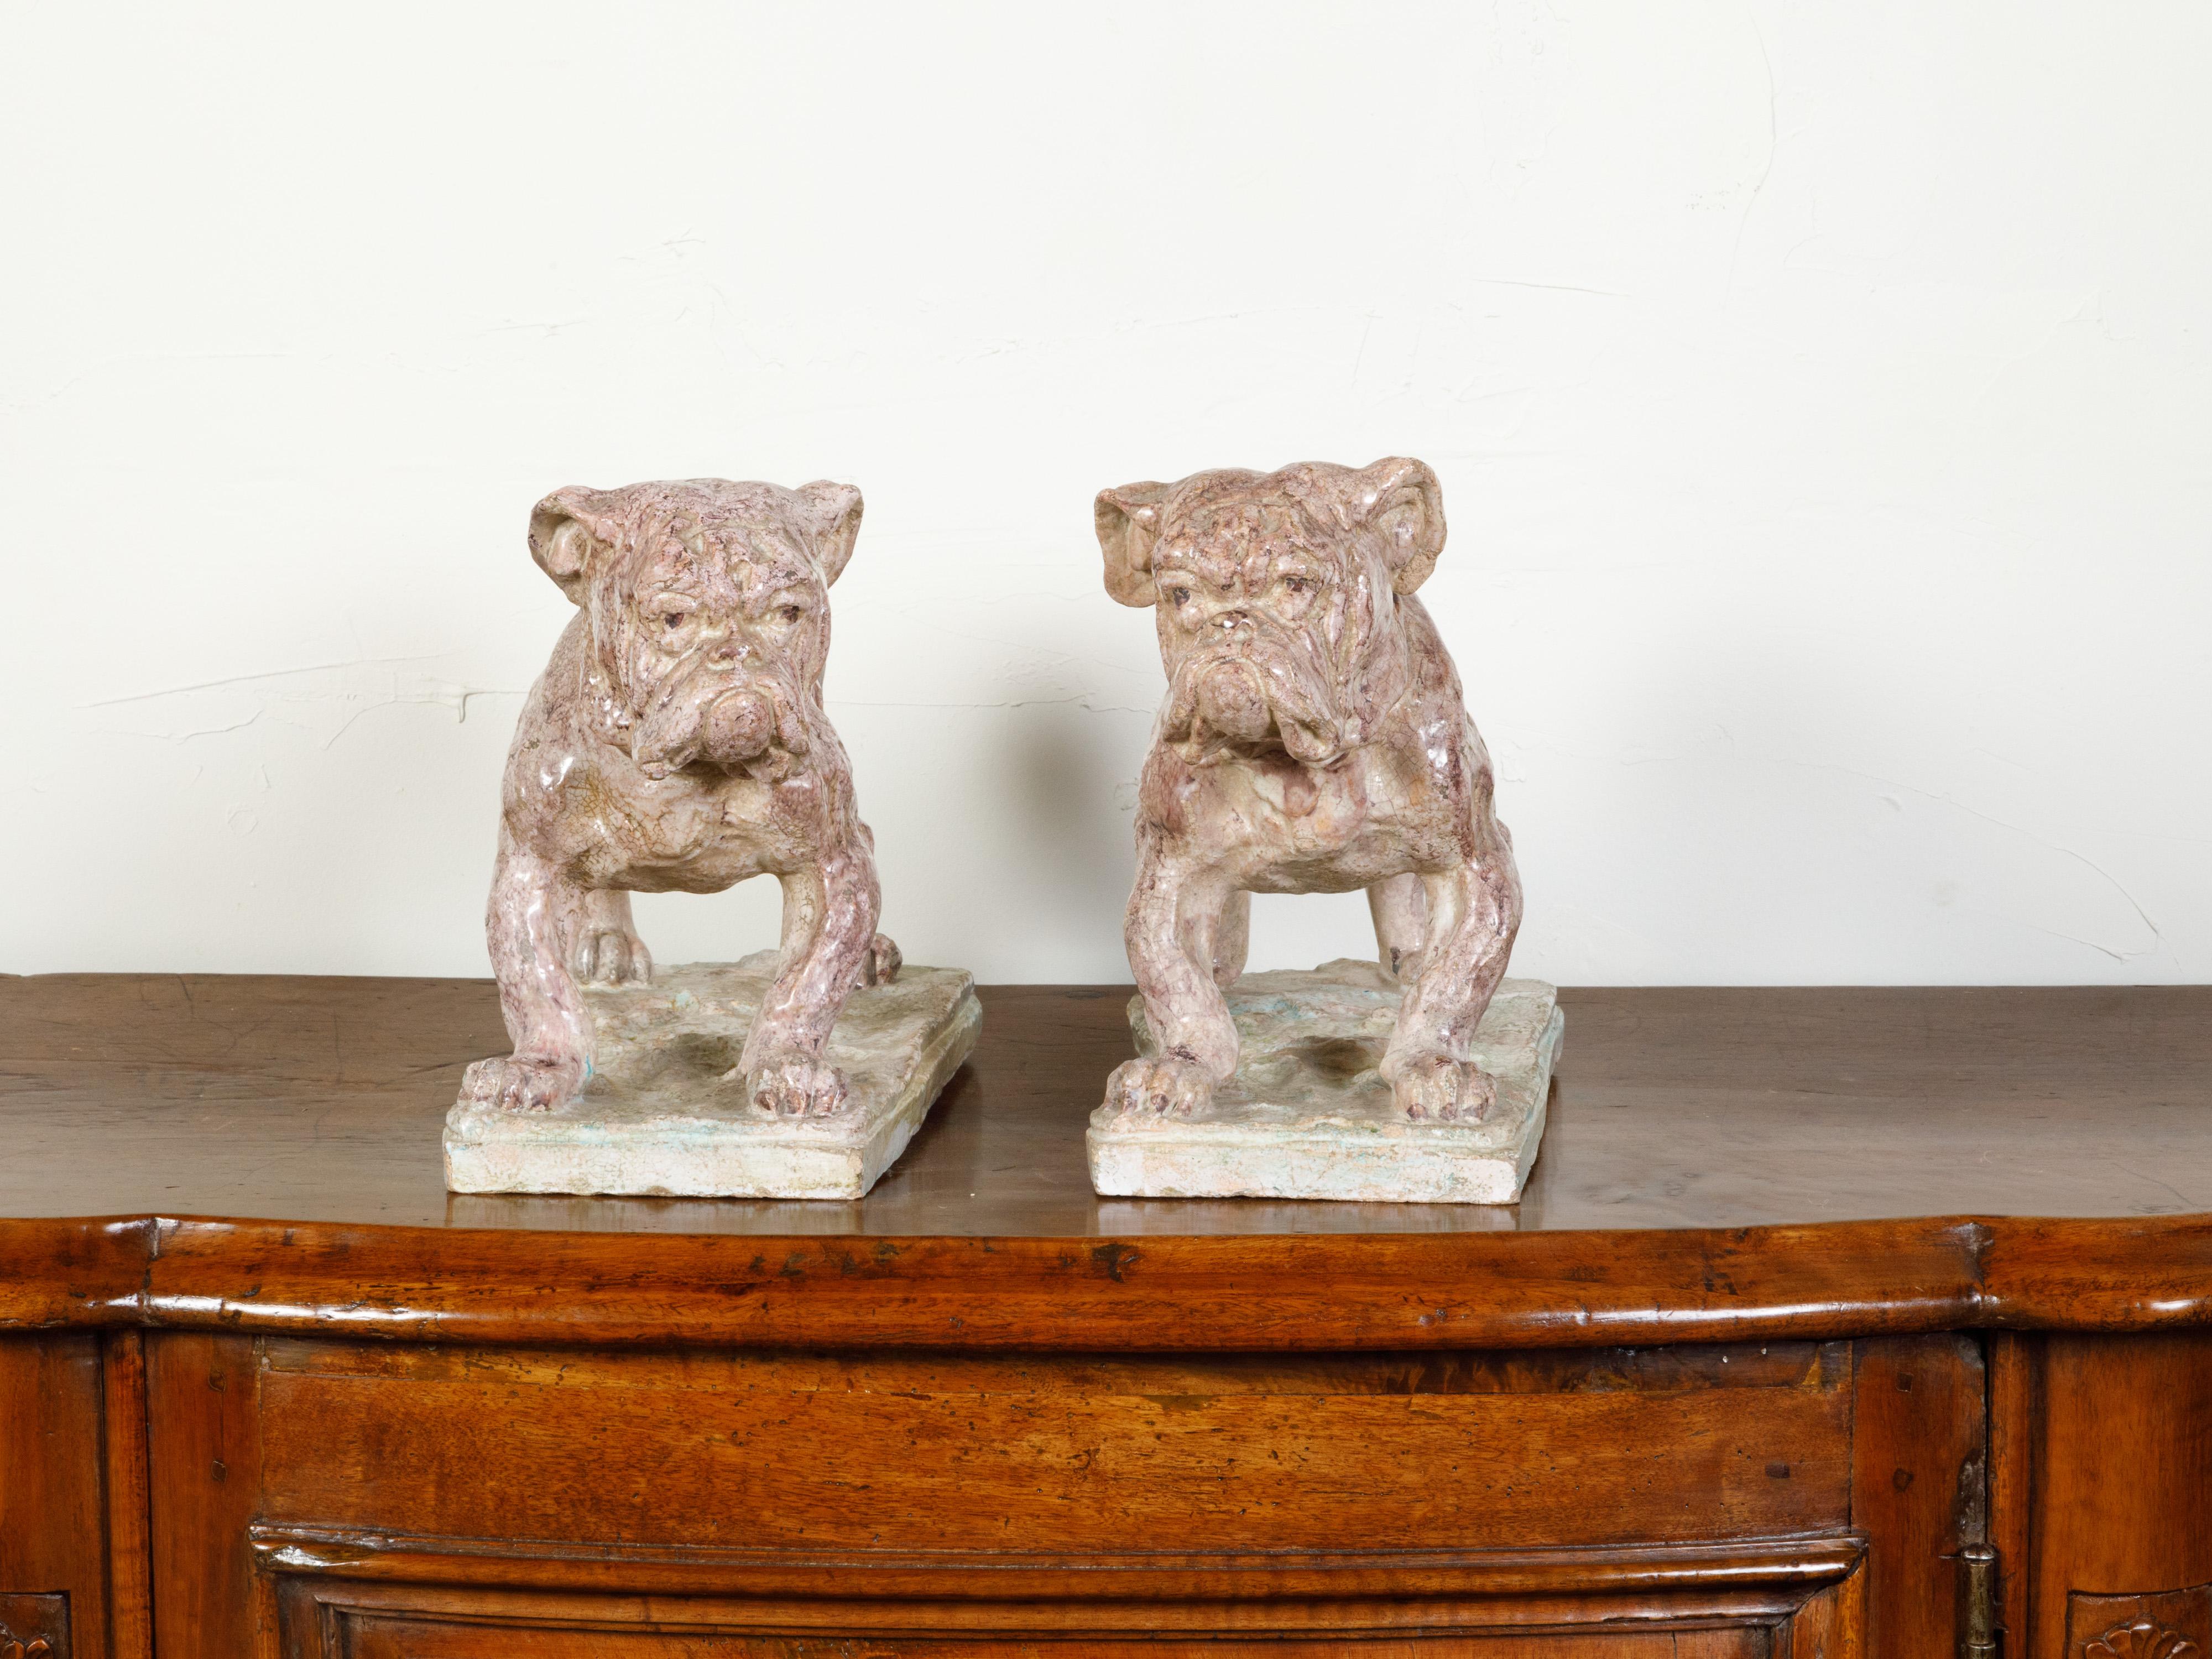 A pair of French faience bulldogs from the 19th century, on rectangular terracotta bases. Created in France during the 19th century, each of this pair of animal sculptures features a bulldog standing firmly on his four legs. Boasting a serious